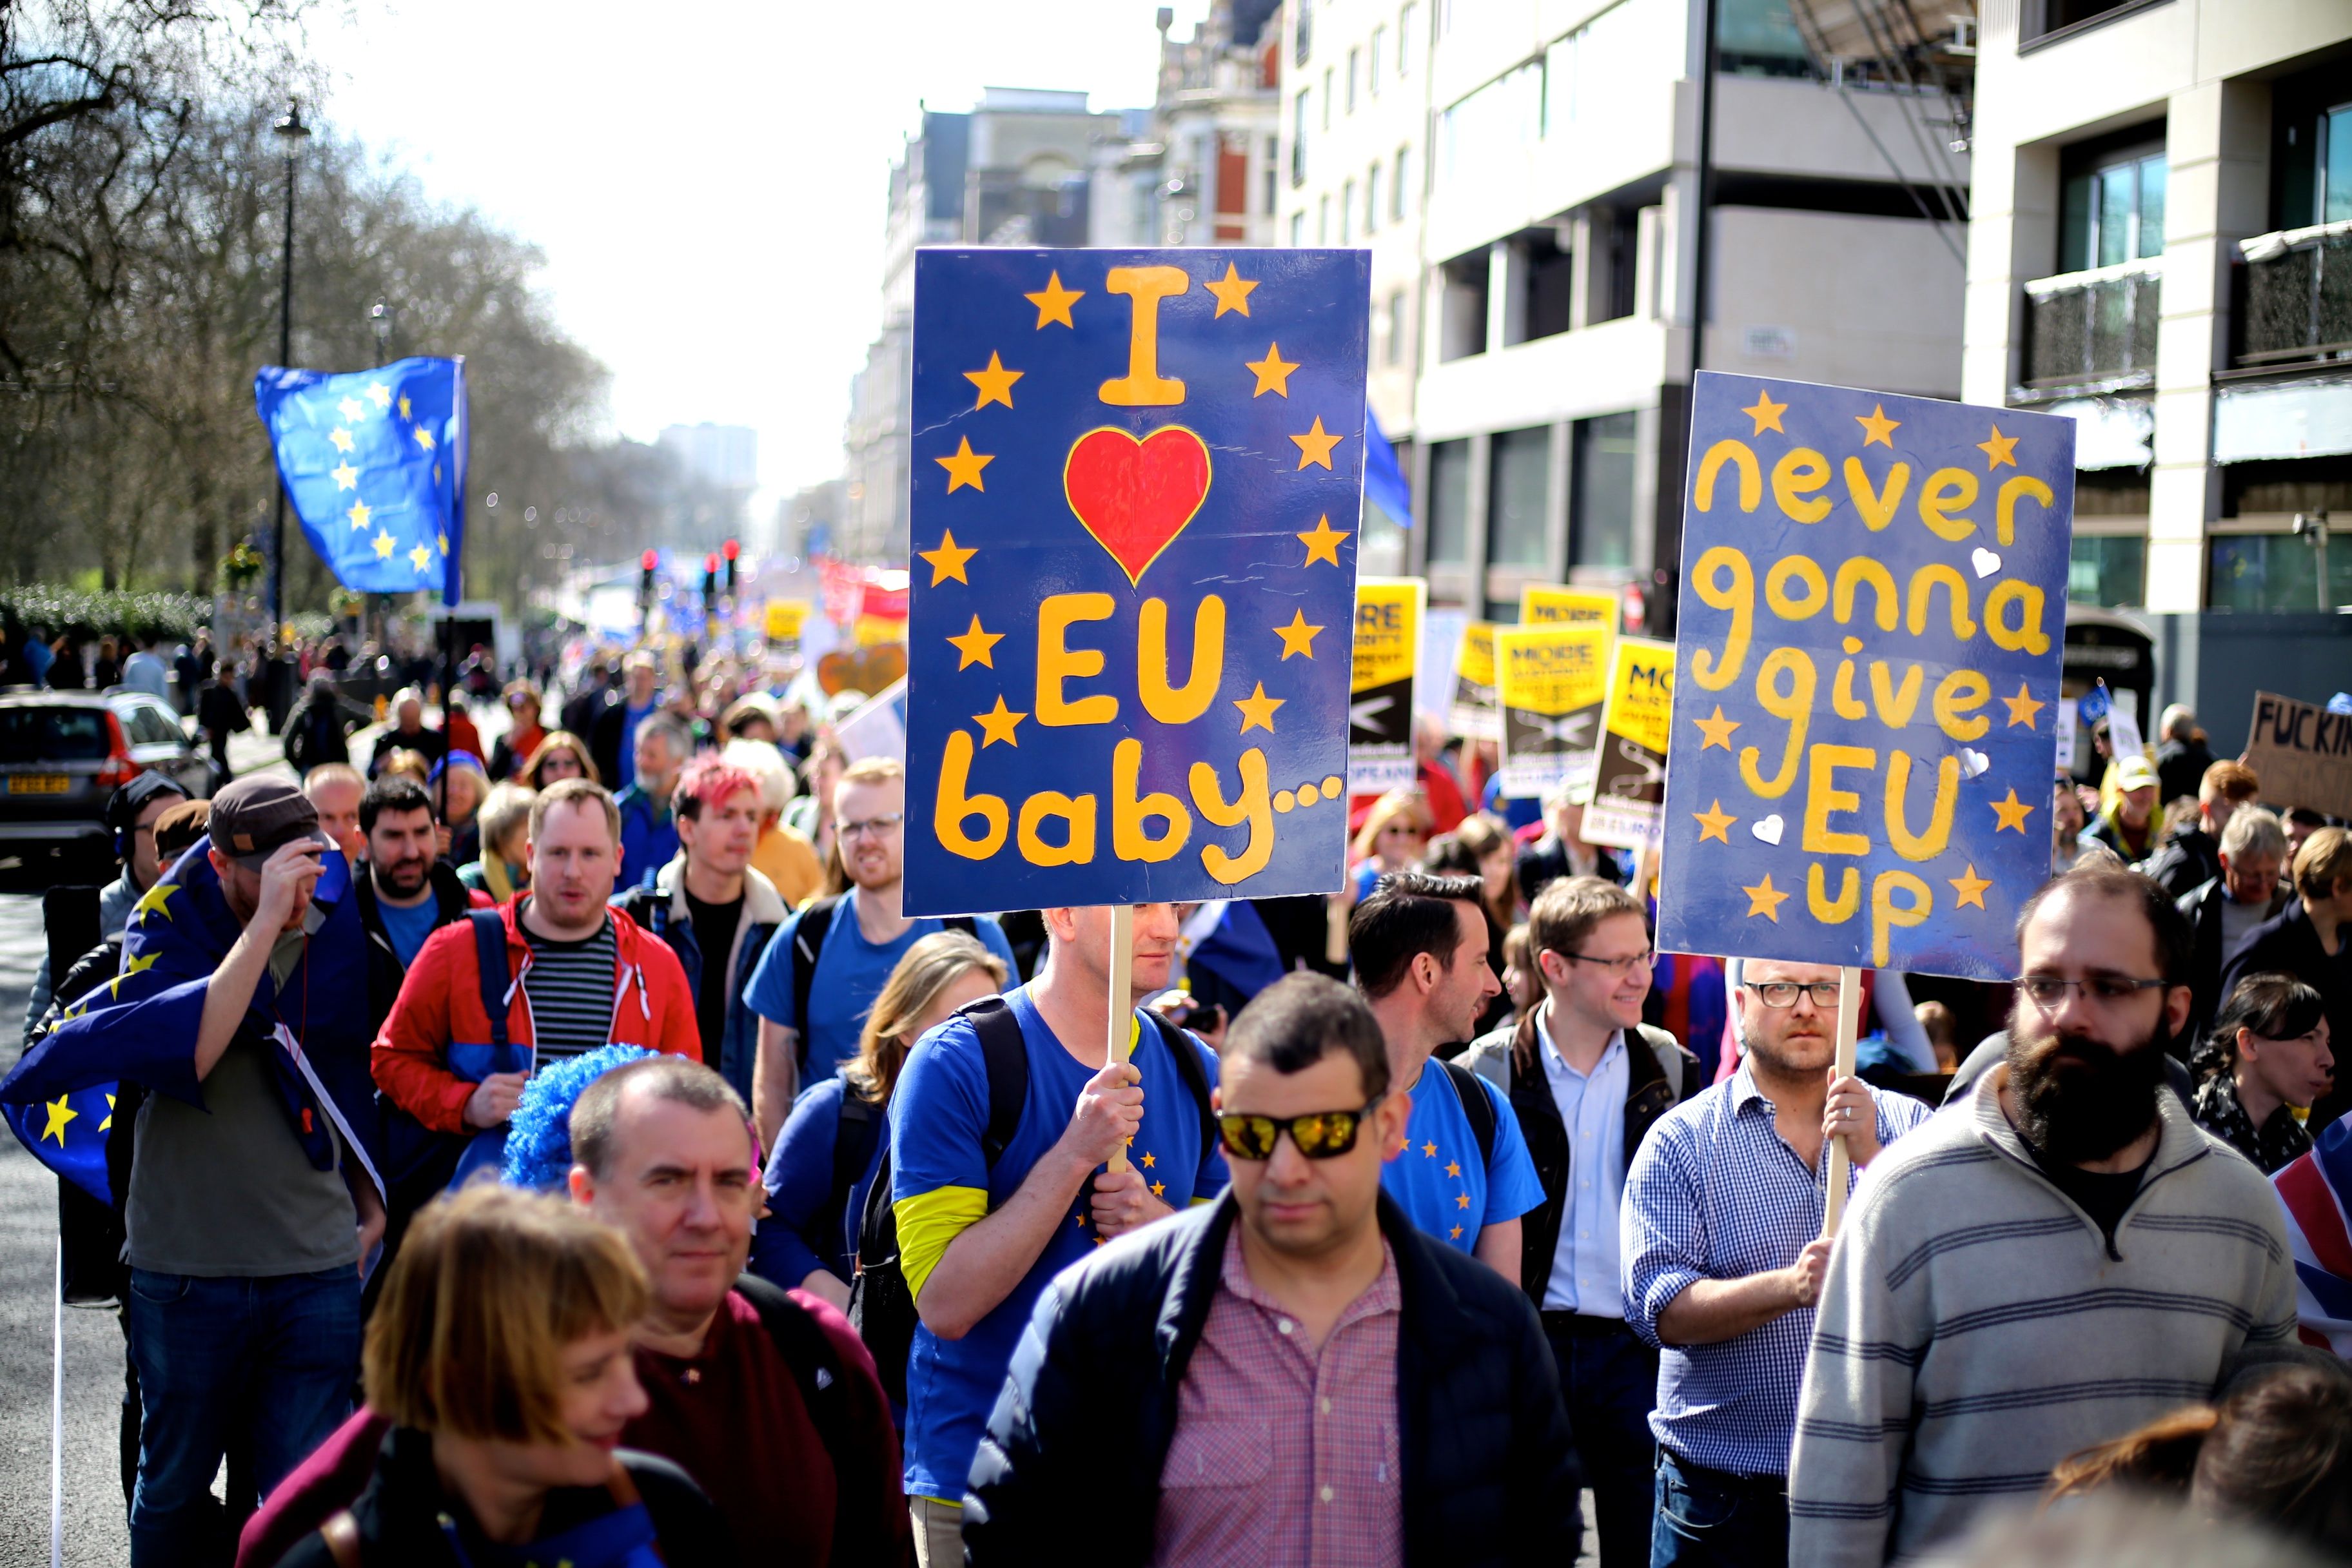 The pro-EU march from Hyde Park to Westminster in London on March 25, 2017, to mark 60 years since the EU's founding agreement, the Treaty of Rome. Image by Ilovetheeu. United Kingdom, 2017.